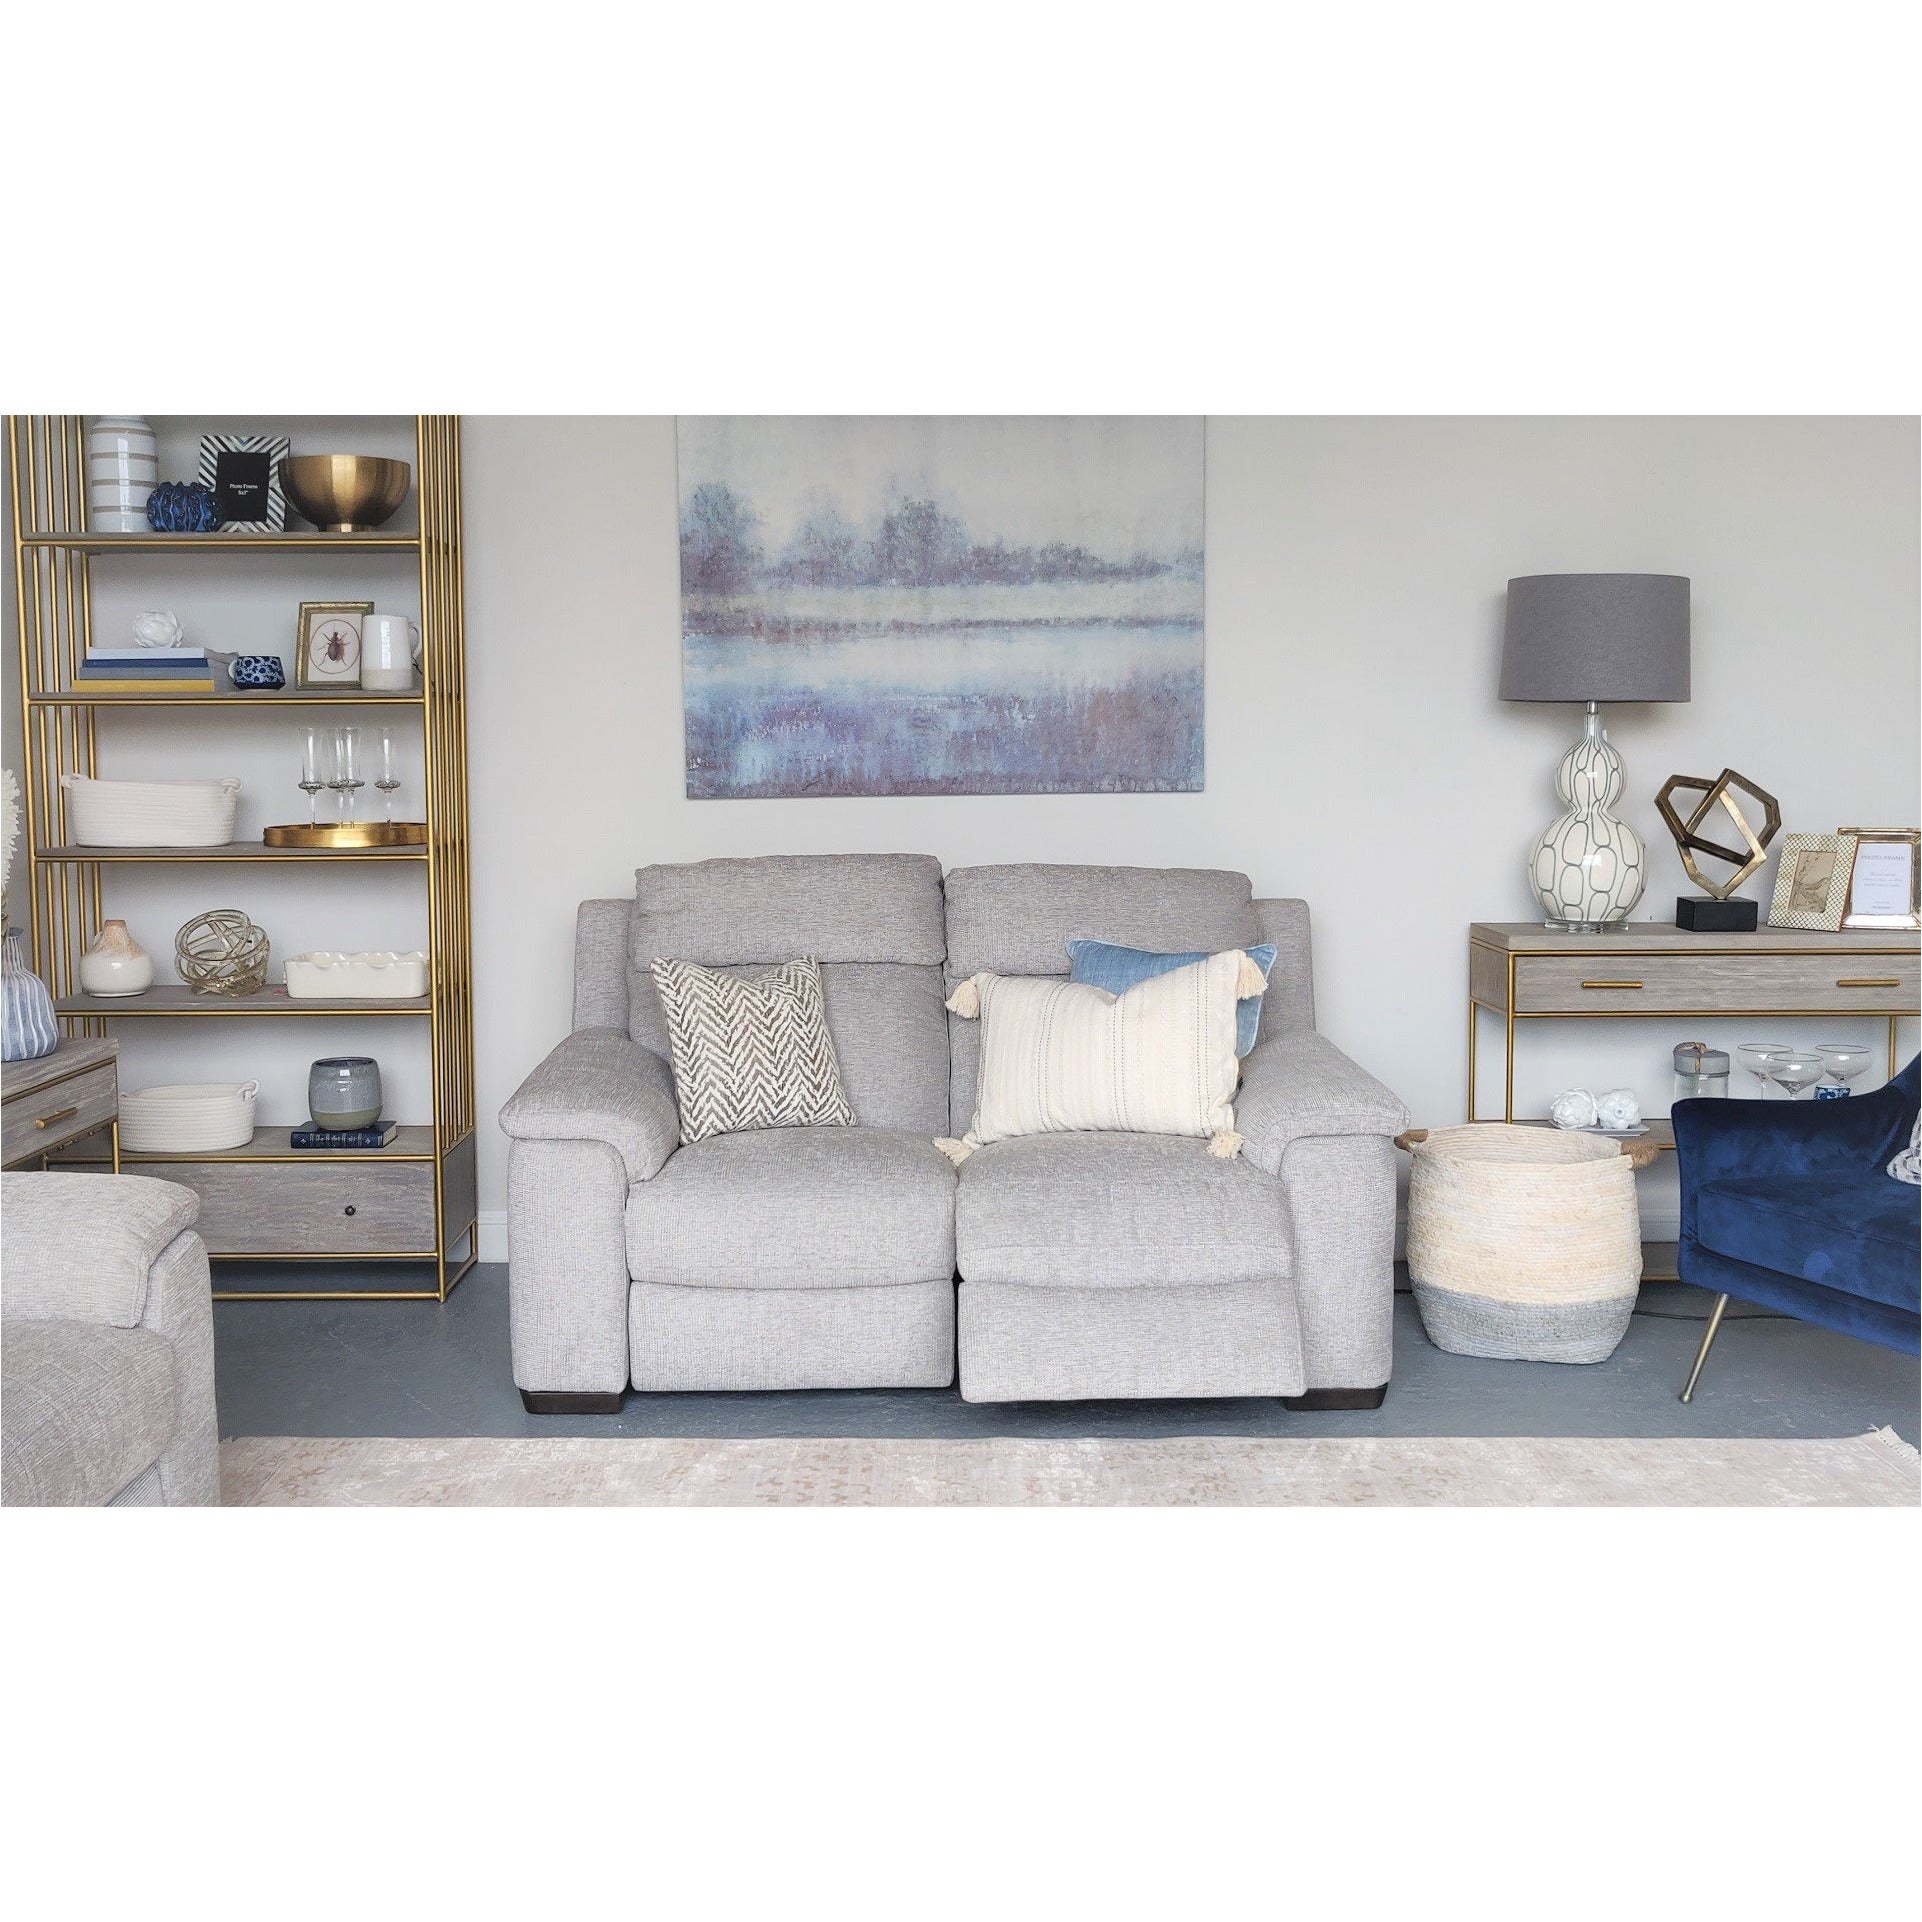 Thompson 2 Seater Electric Reclining Sofa